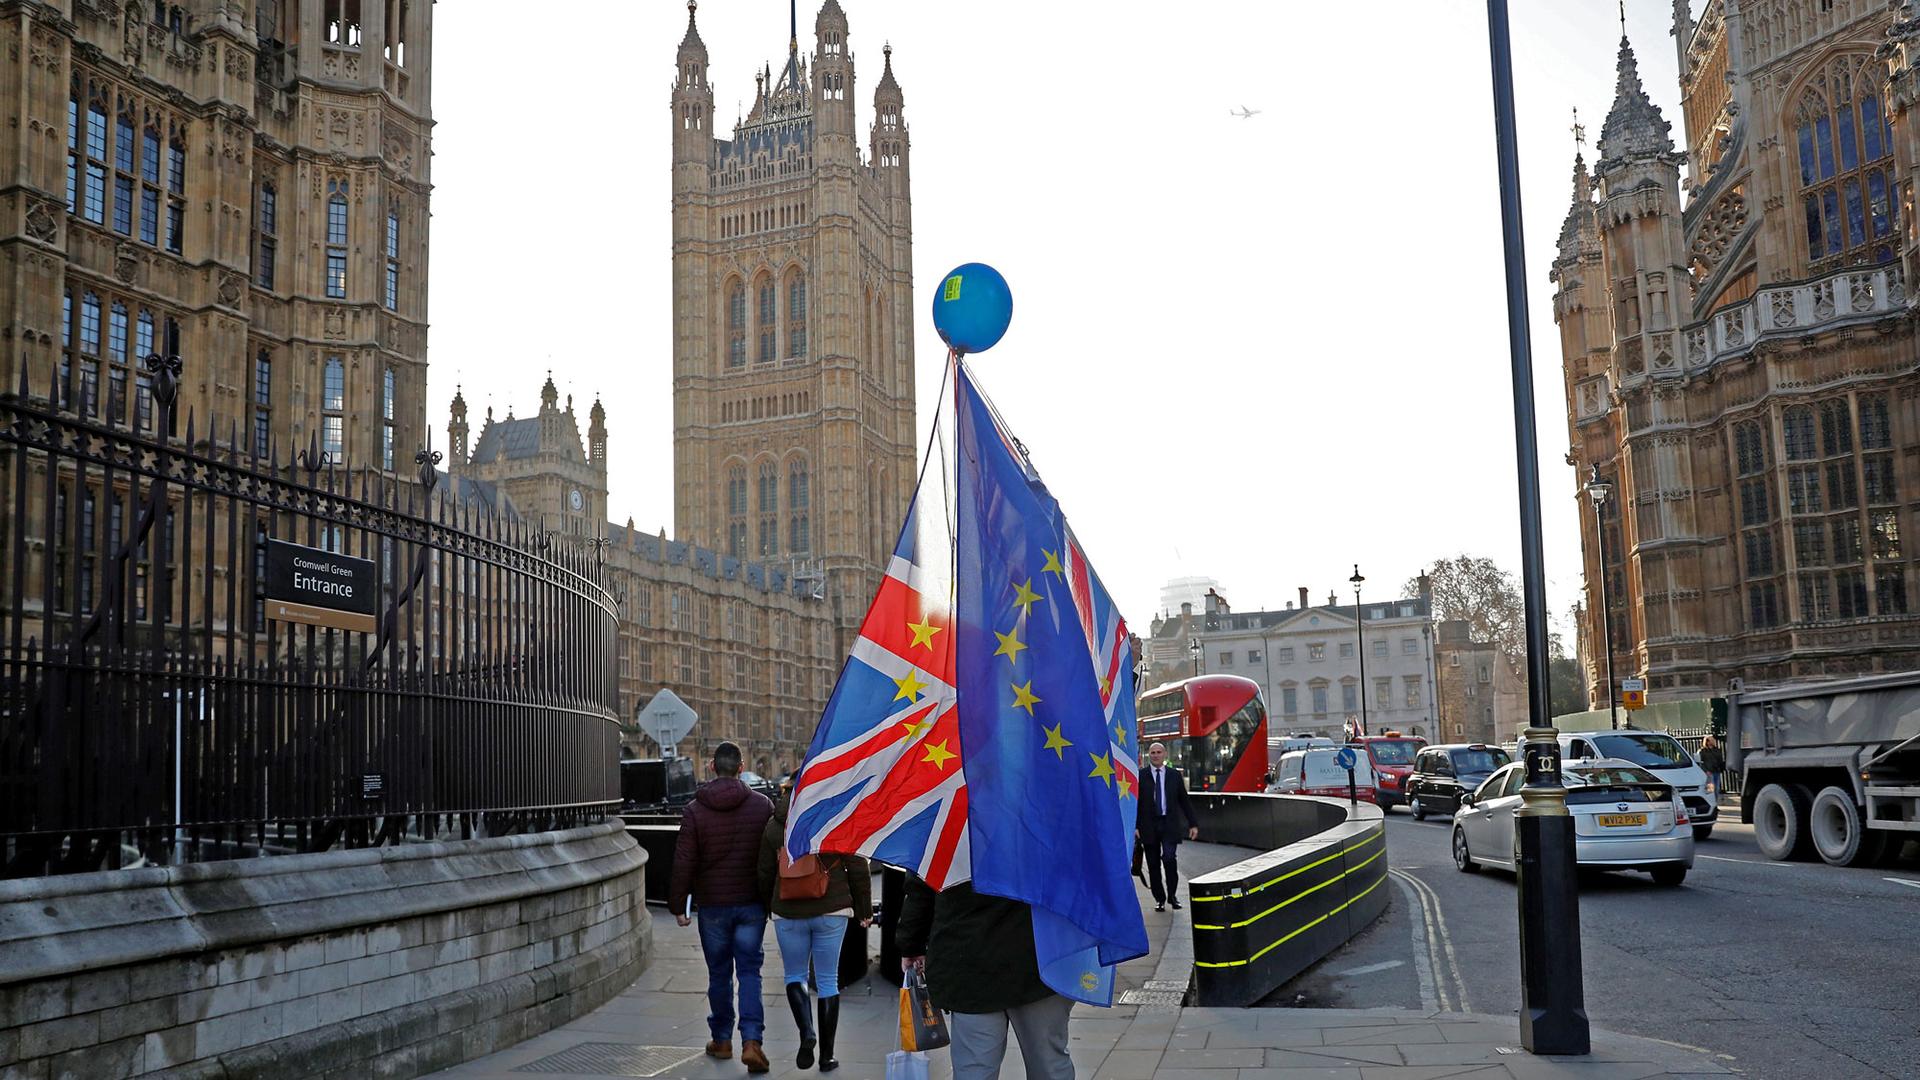 An person is show walking away from the camera carrying both British and EU flags .